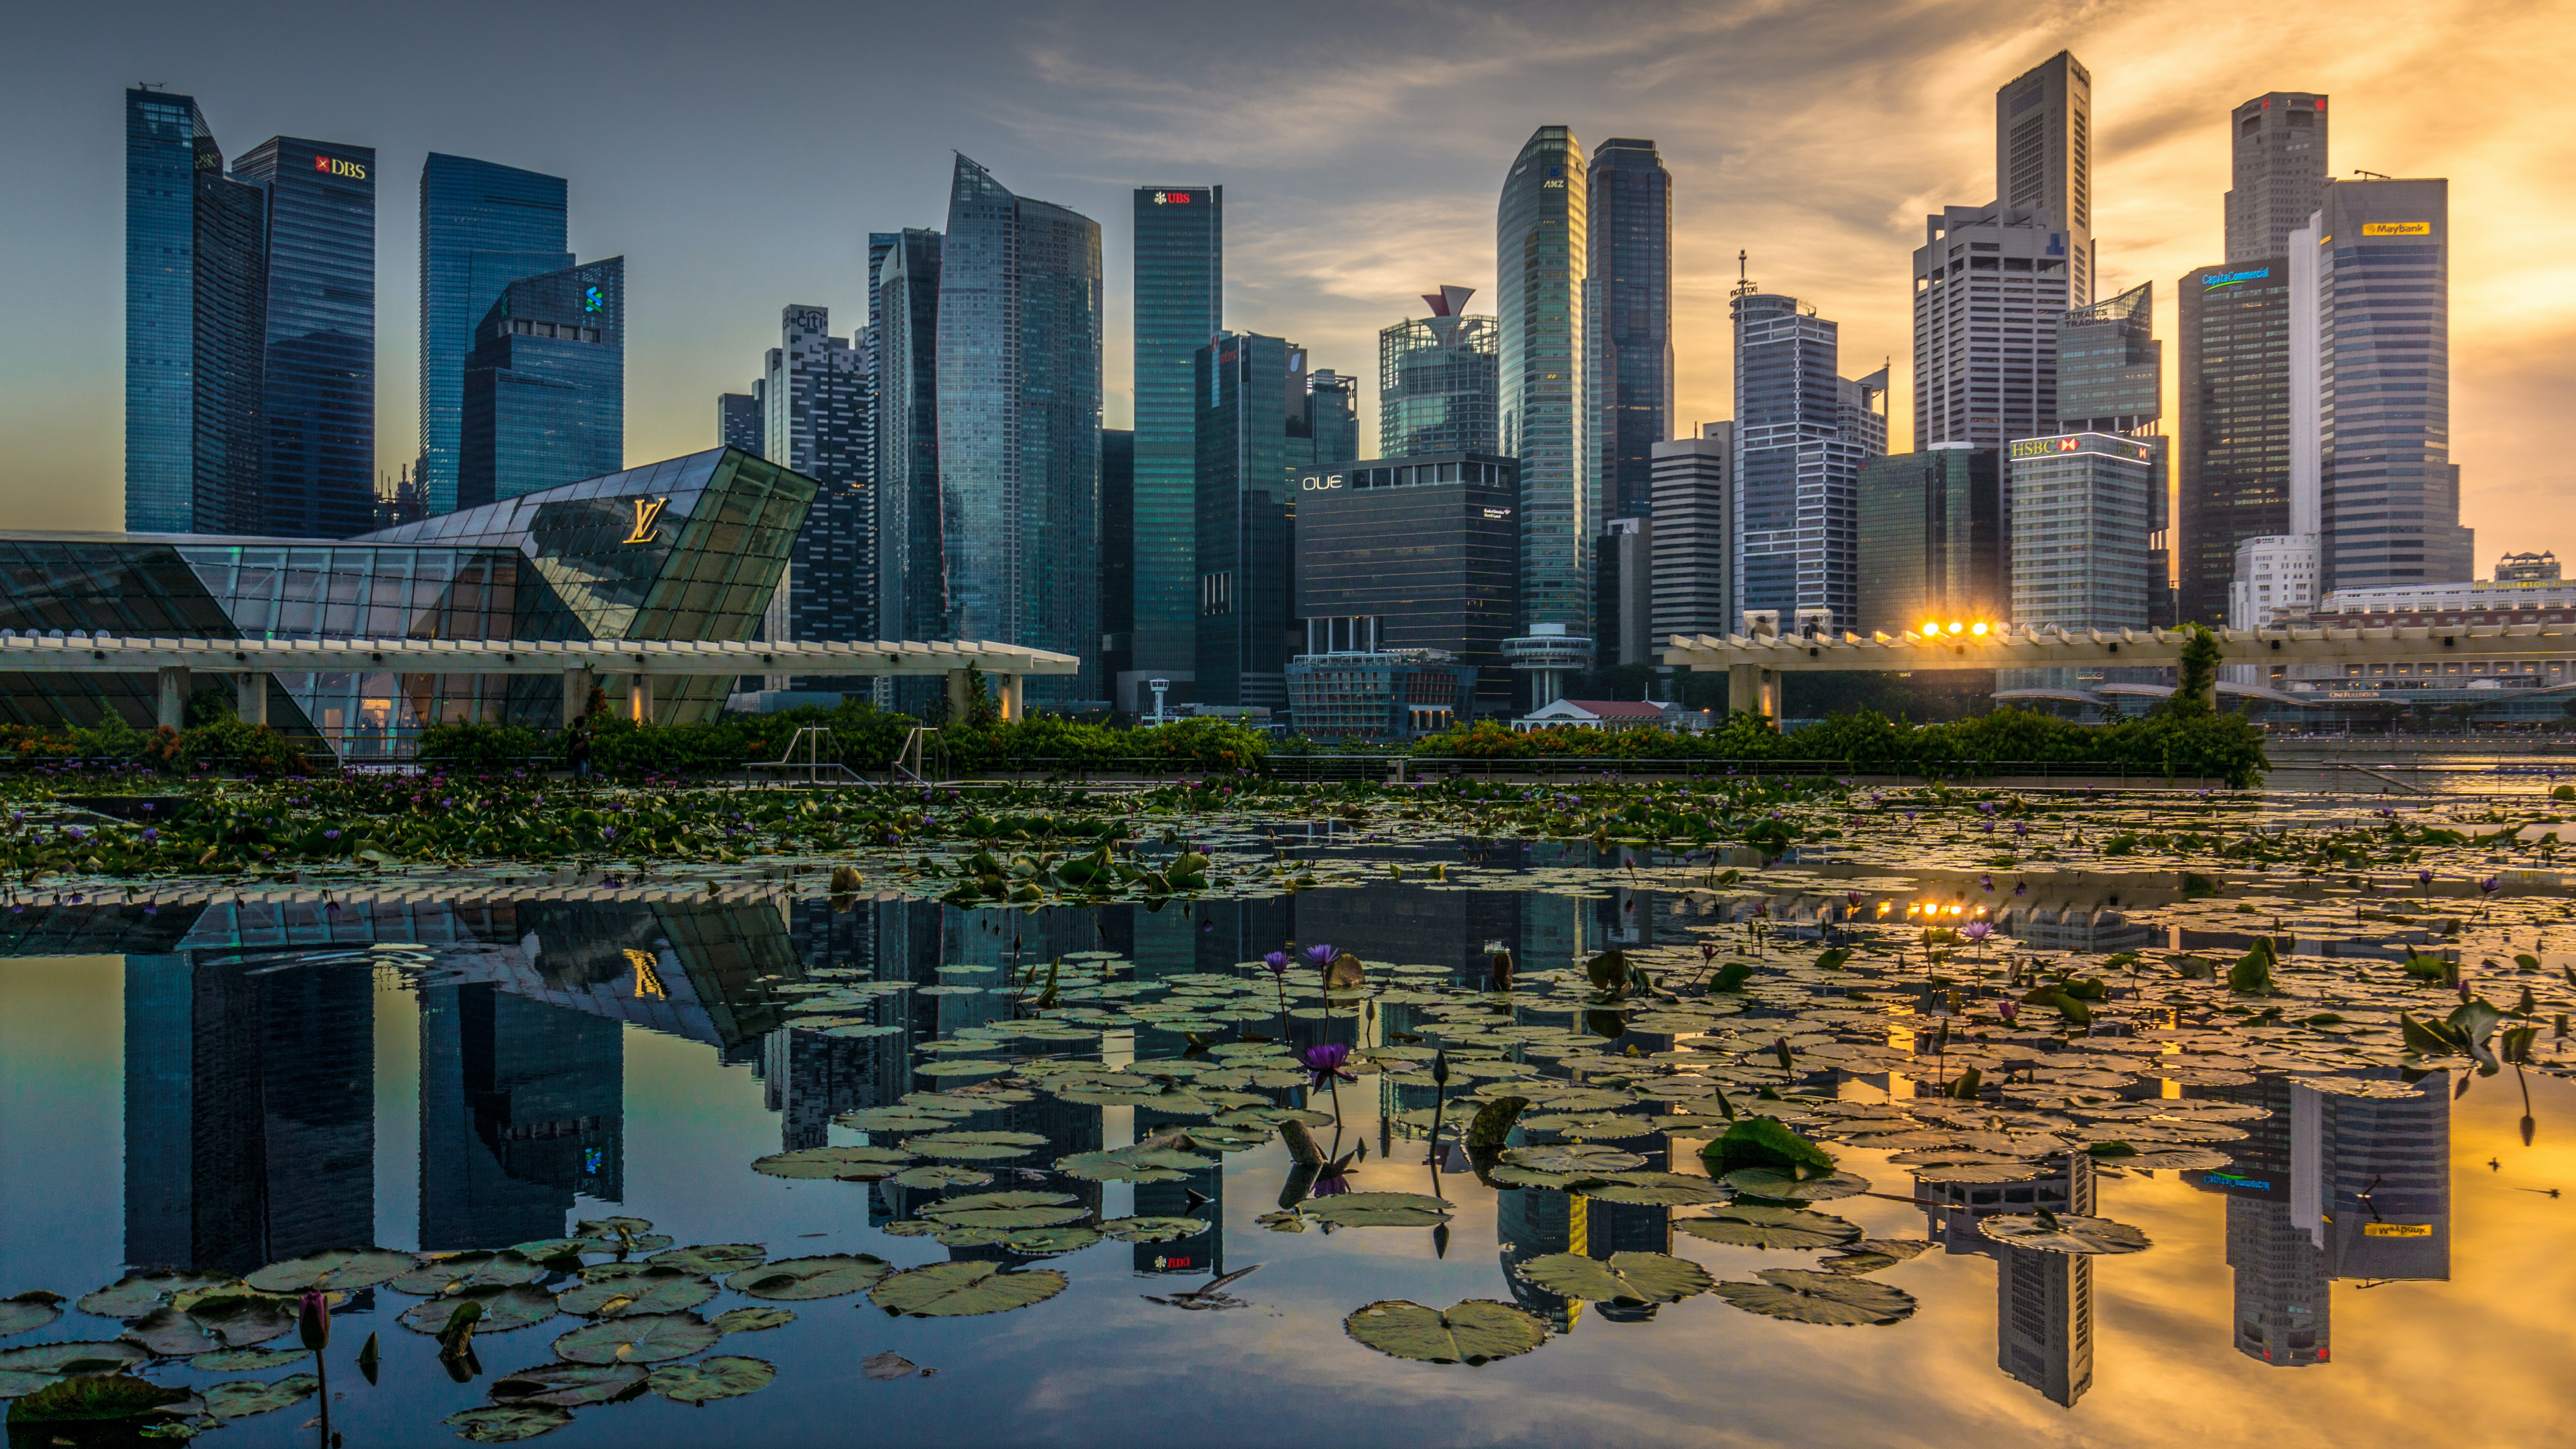 water lily, cities, architecture, city, building, reflection, skyscrapers